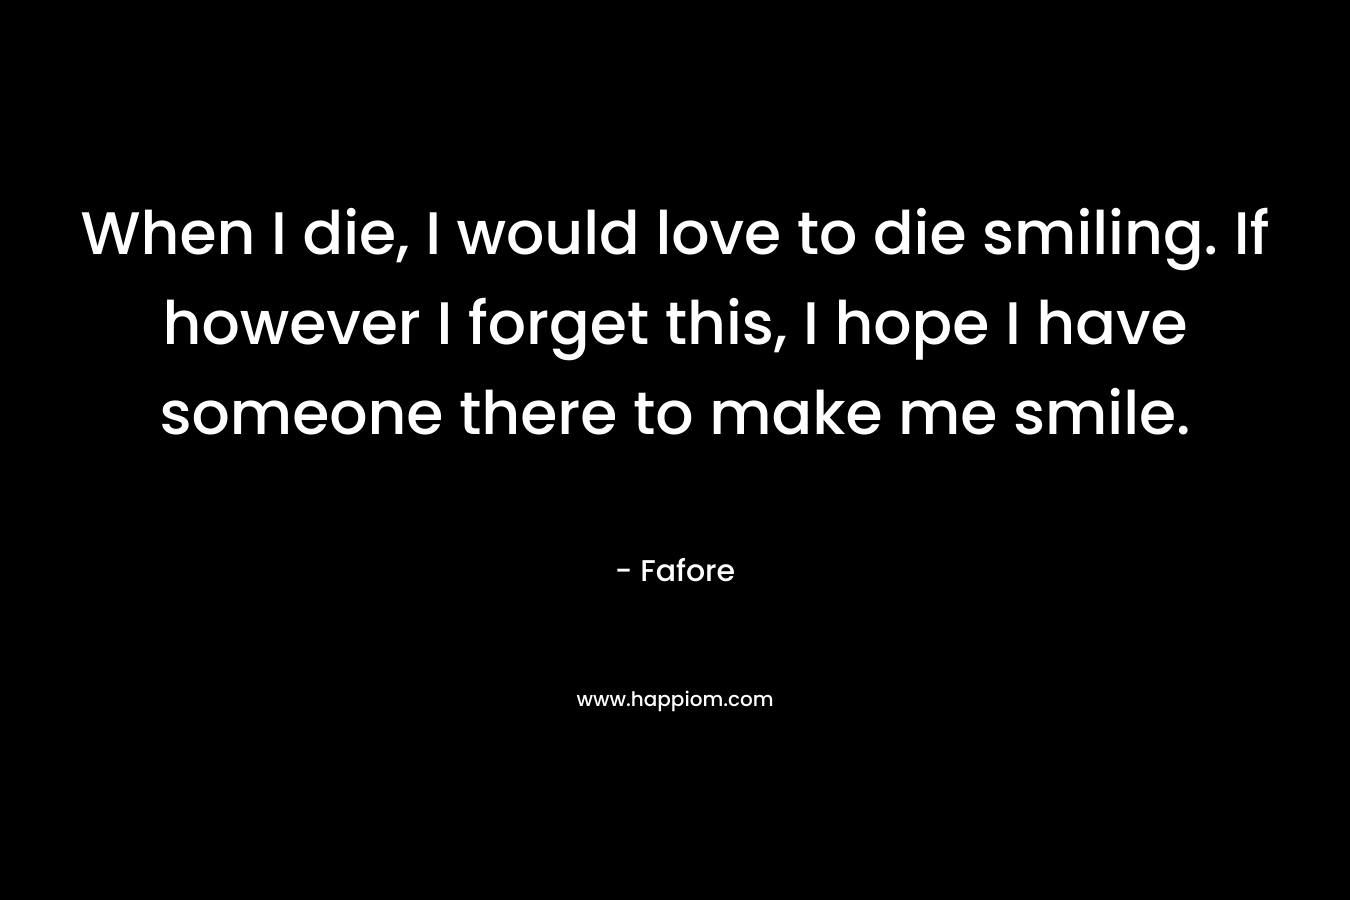 When I die, I would love to die smiling. If however I forget this, I hope I have someone there to make me smile. – Fafore